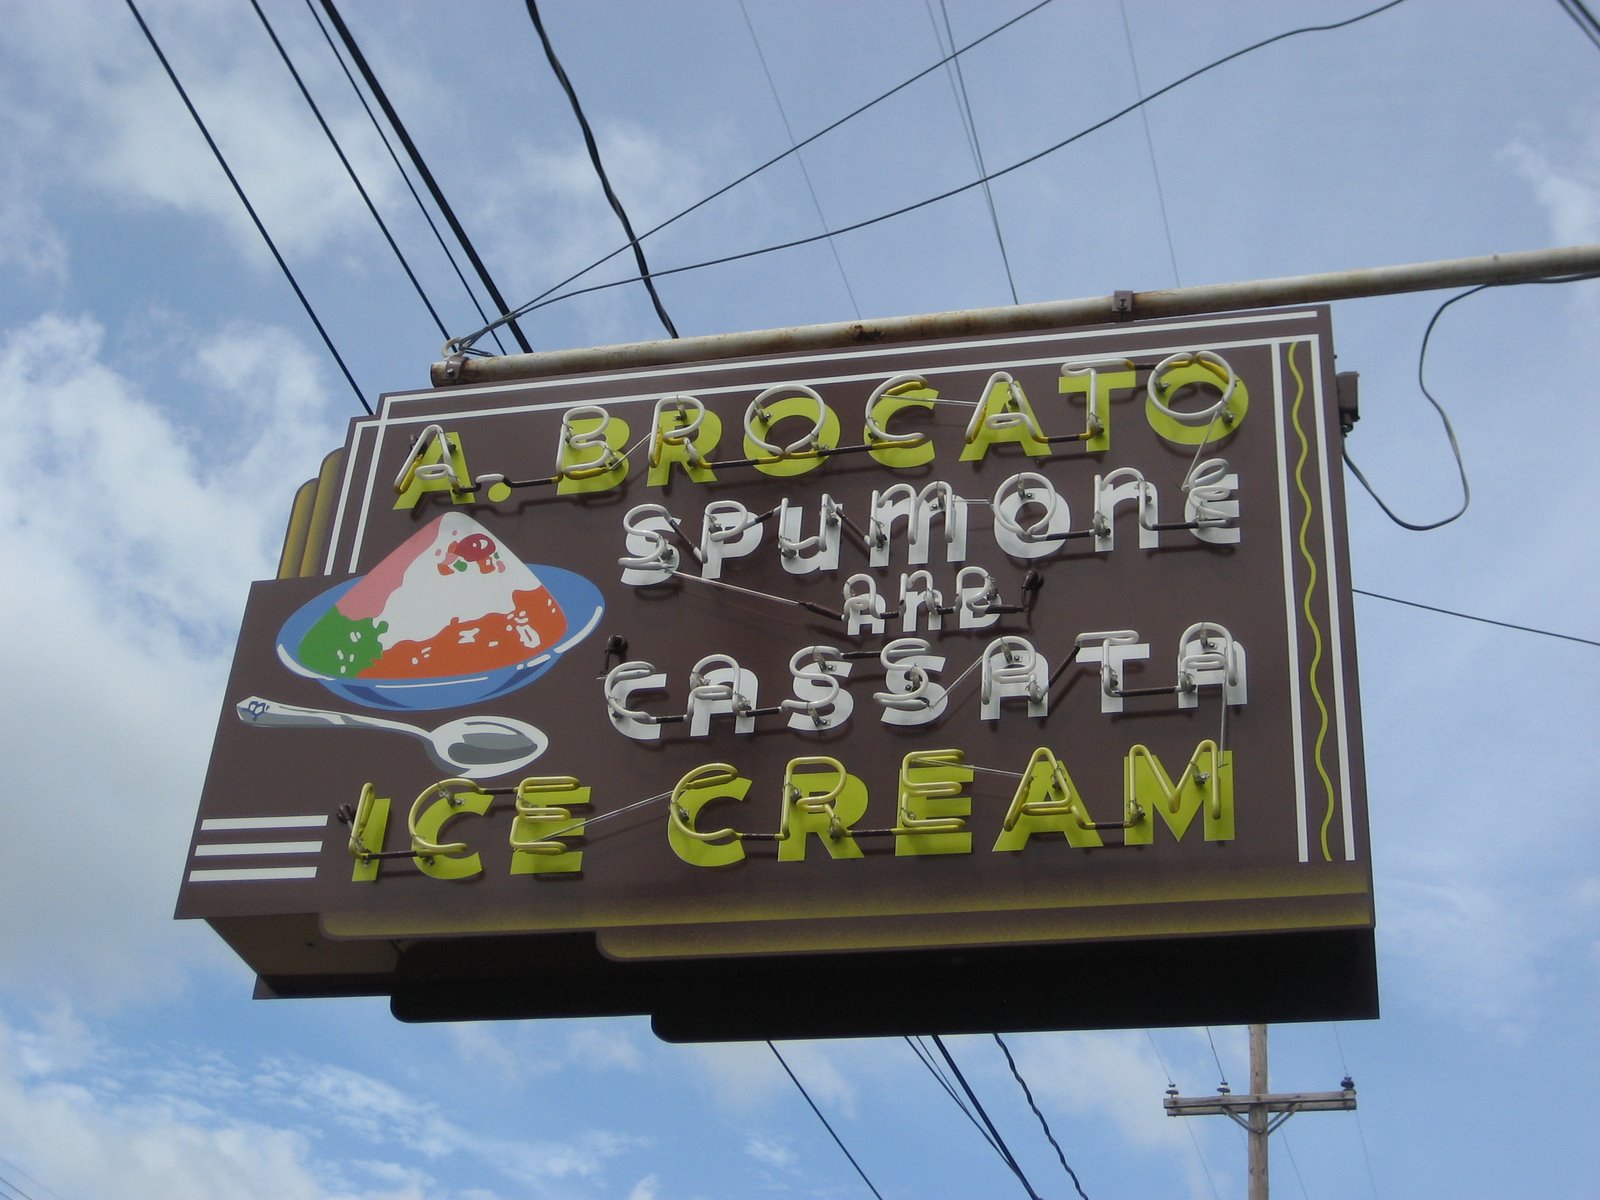 [brocato's+sign+from+south.JPG]